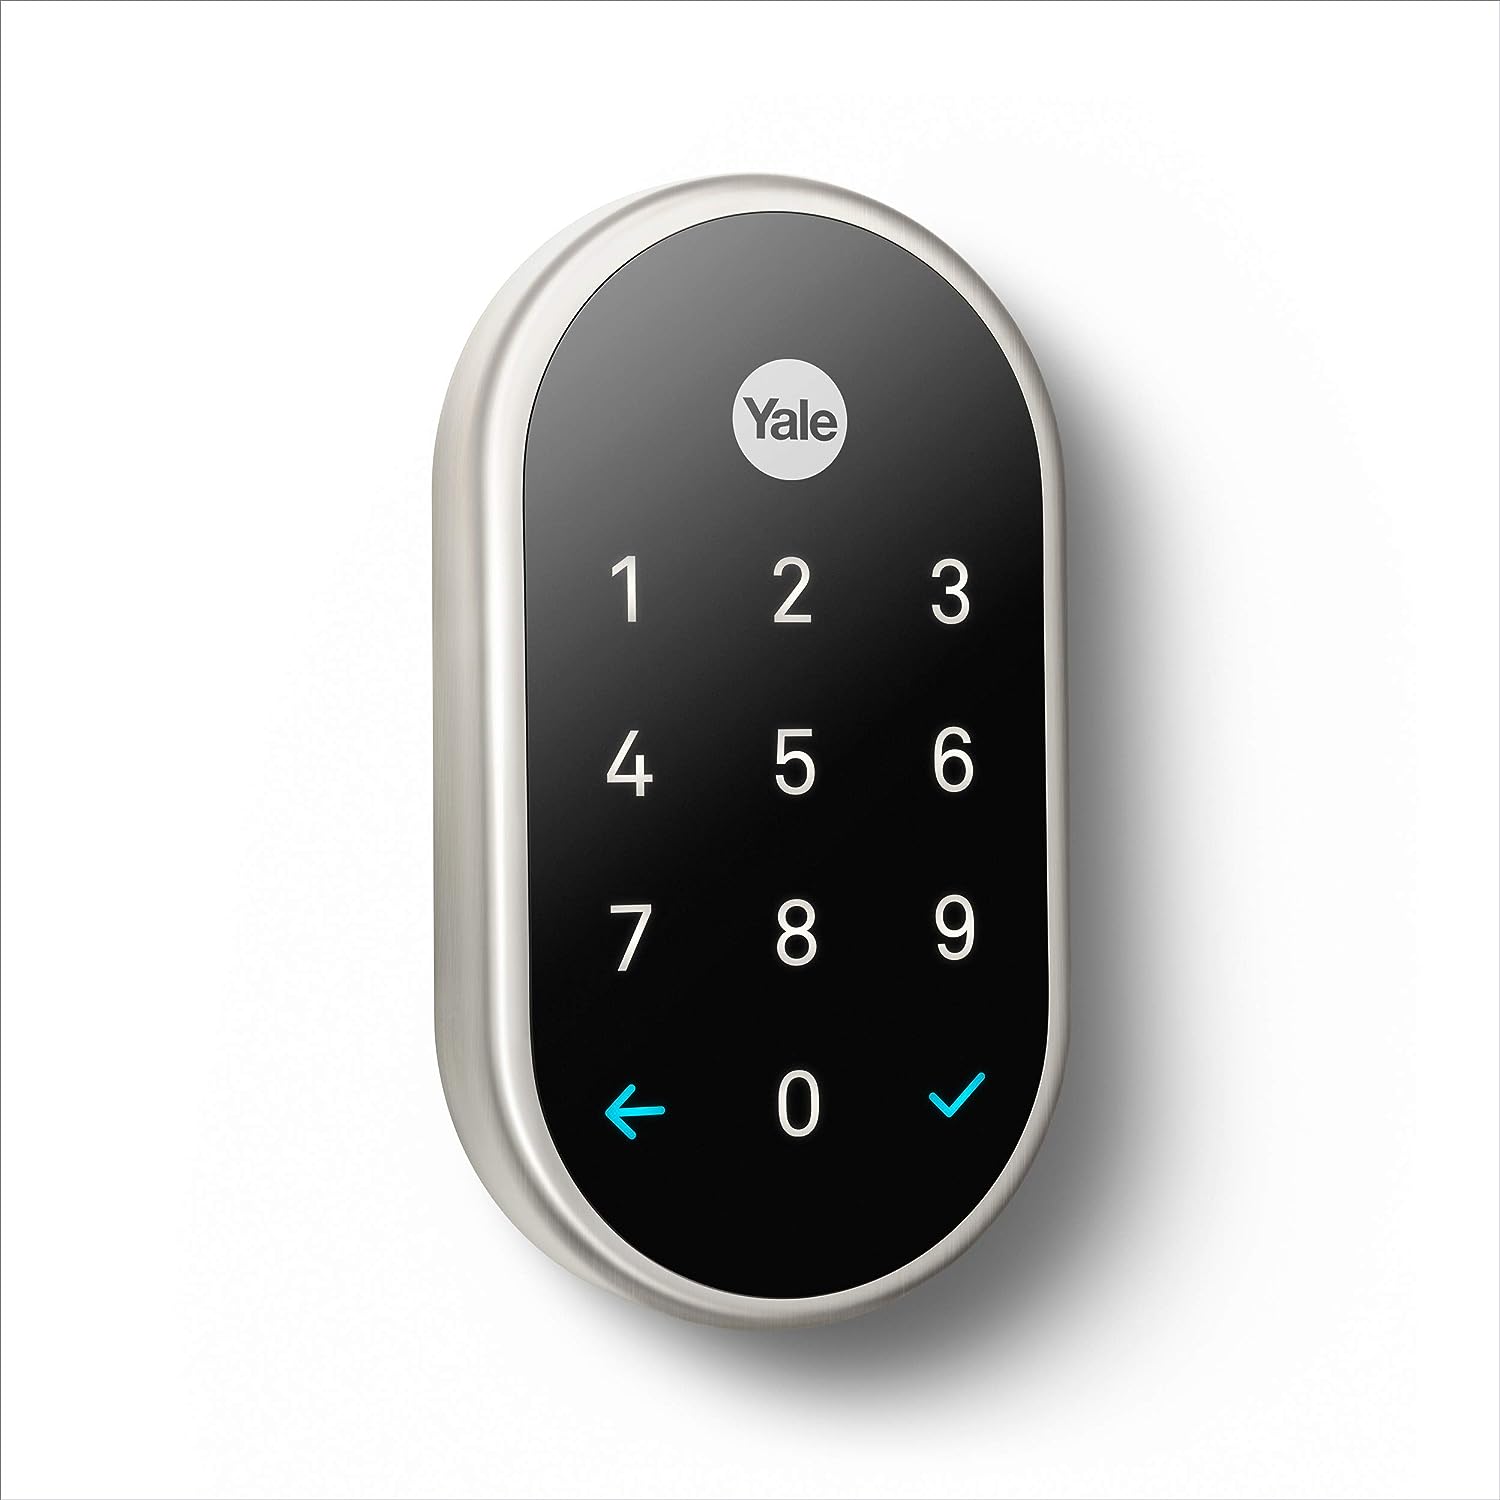 Google Nest x Yale Lock Review - The Ultimate Tamper-Proof Smart Lock for Keyless Entry